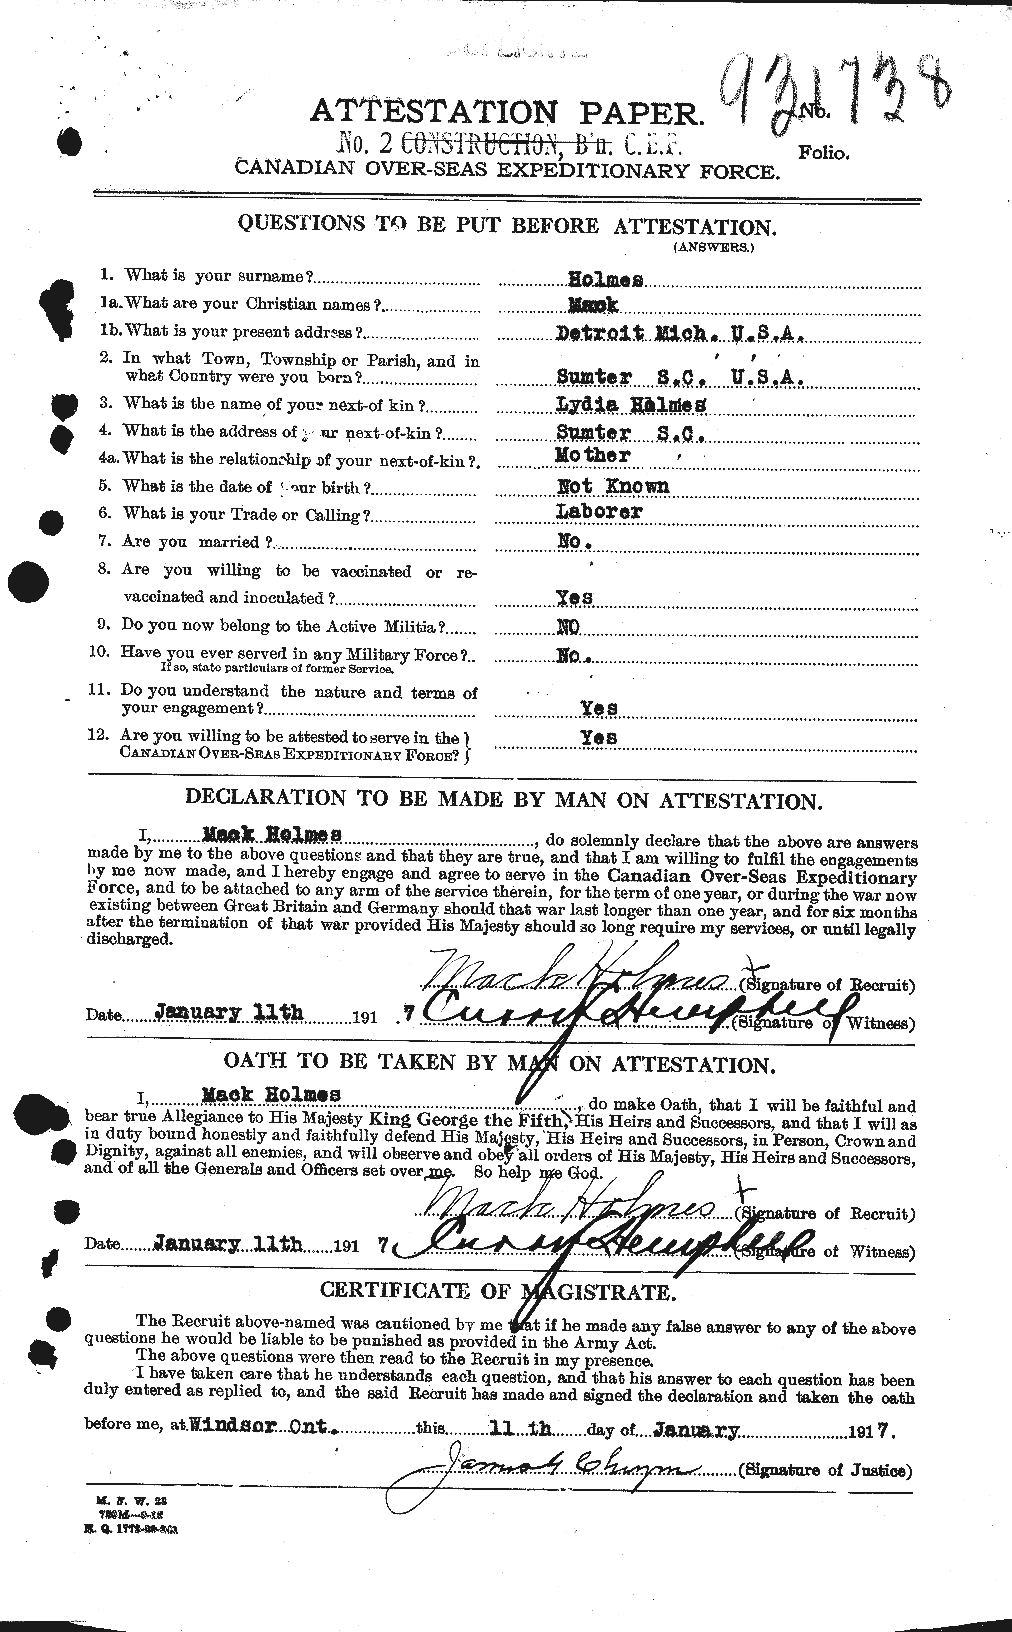 Personnel Records of the First World War - CEF 401845a